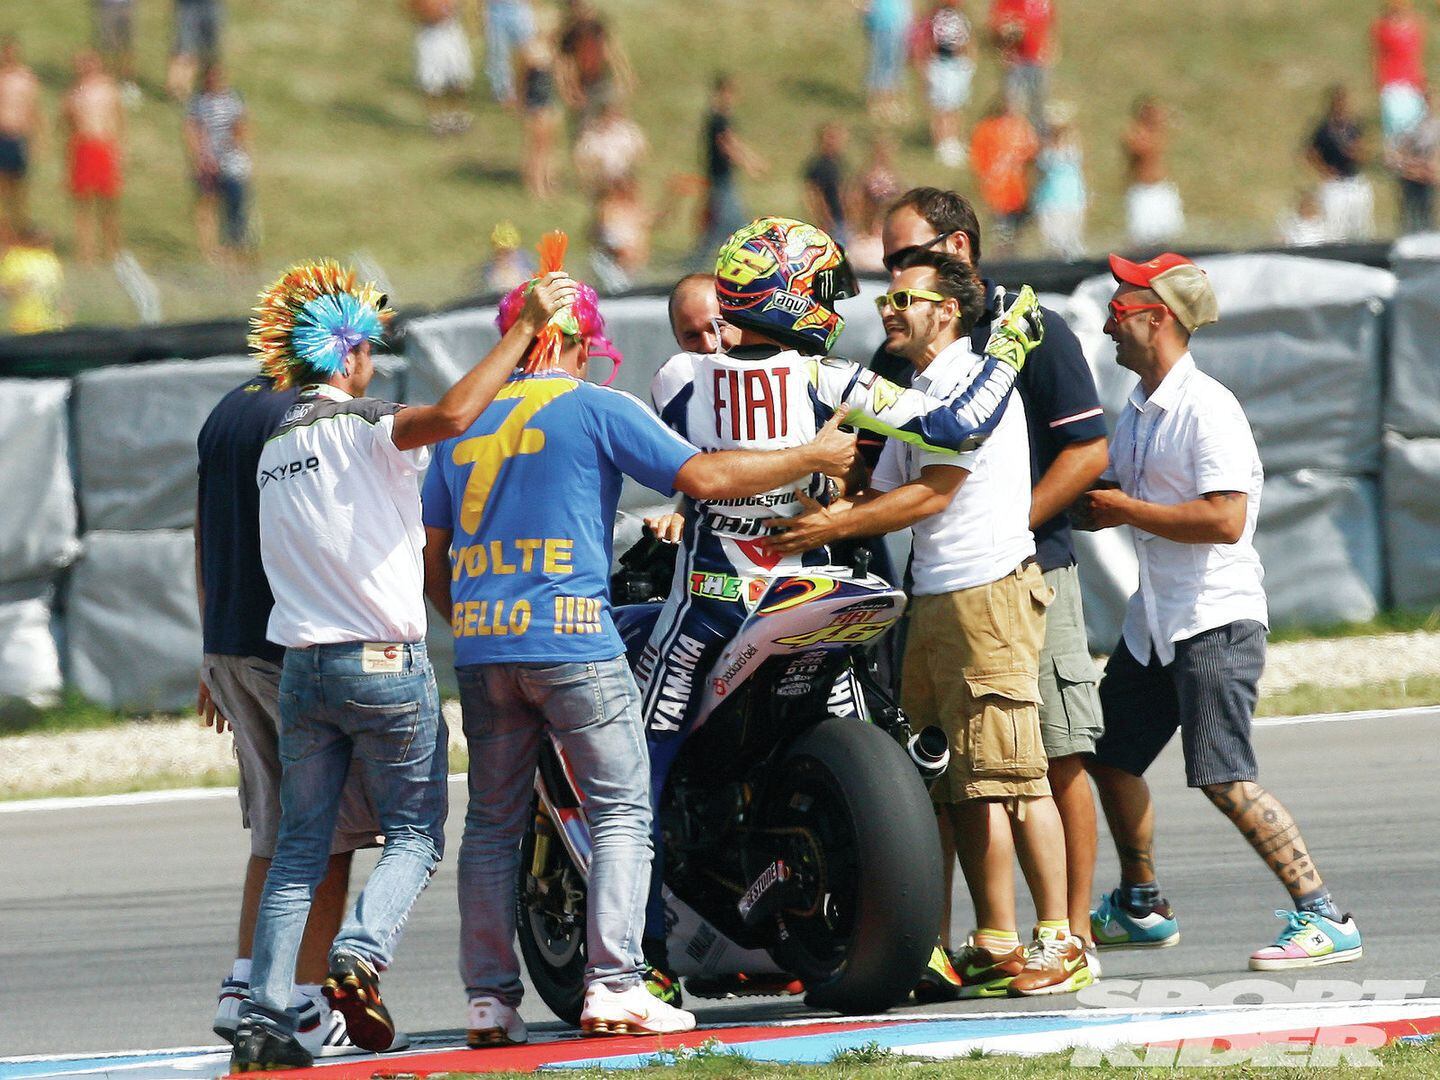 Rossi sparked passion for MotoGP in normal people